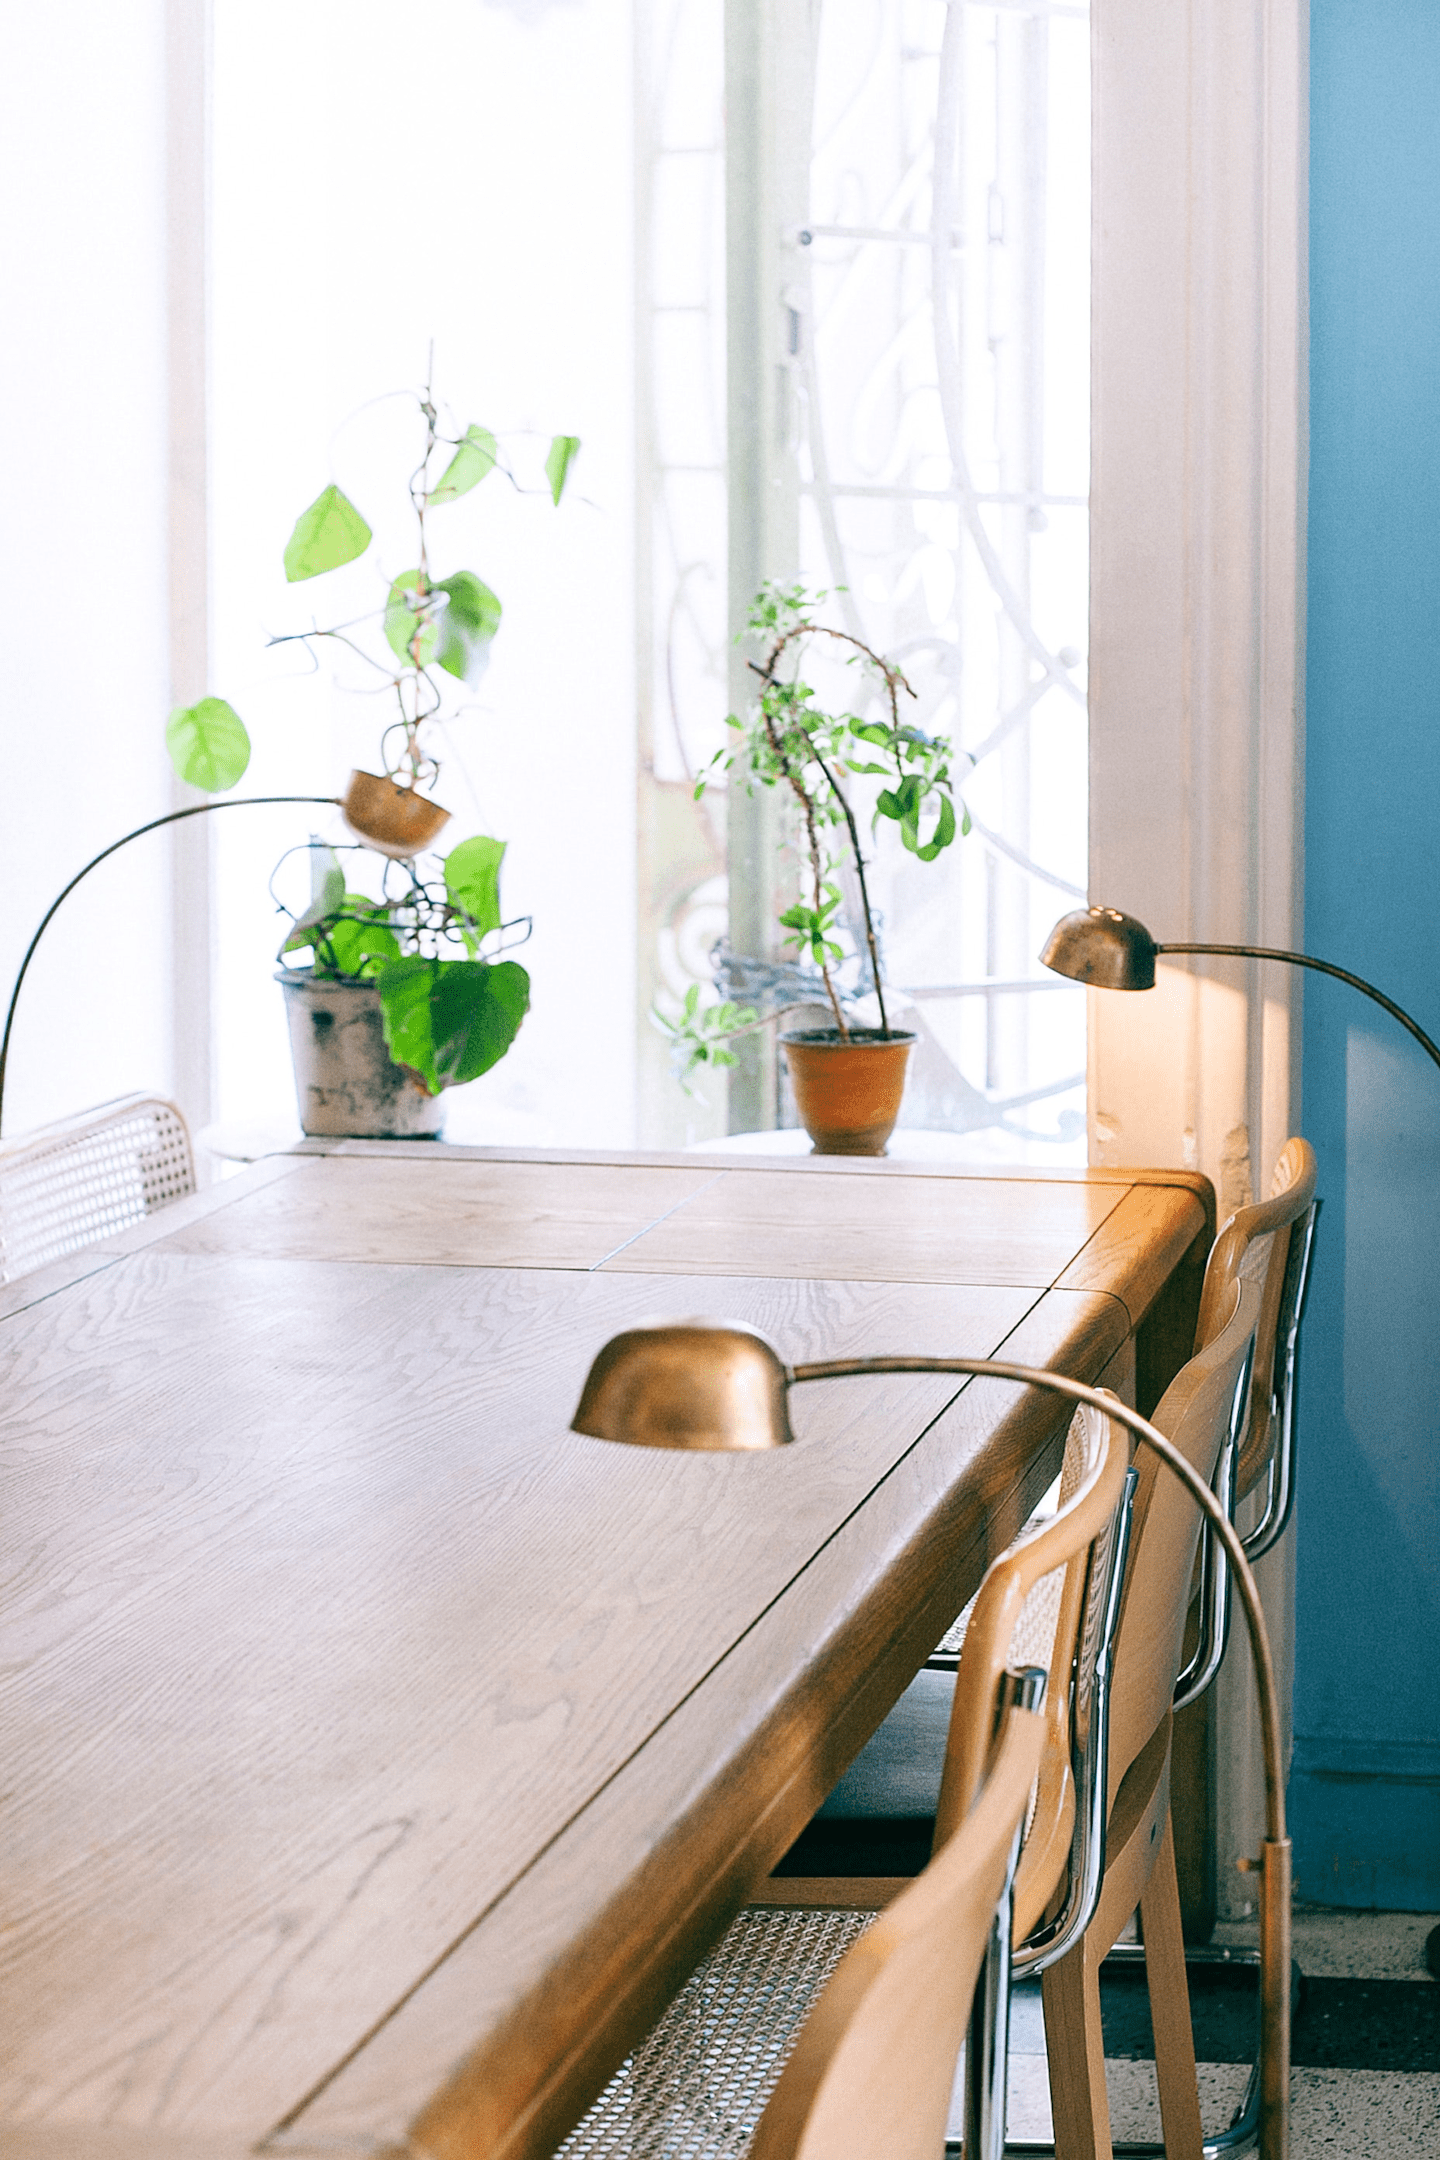 Photo by Maria Orlova: https://www.pexels.com/photo/interior-of-modern-dining-room-at-home-4906504/